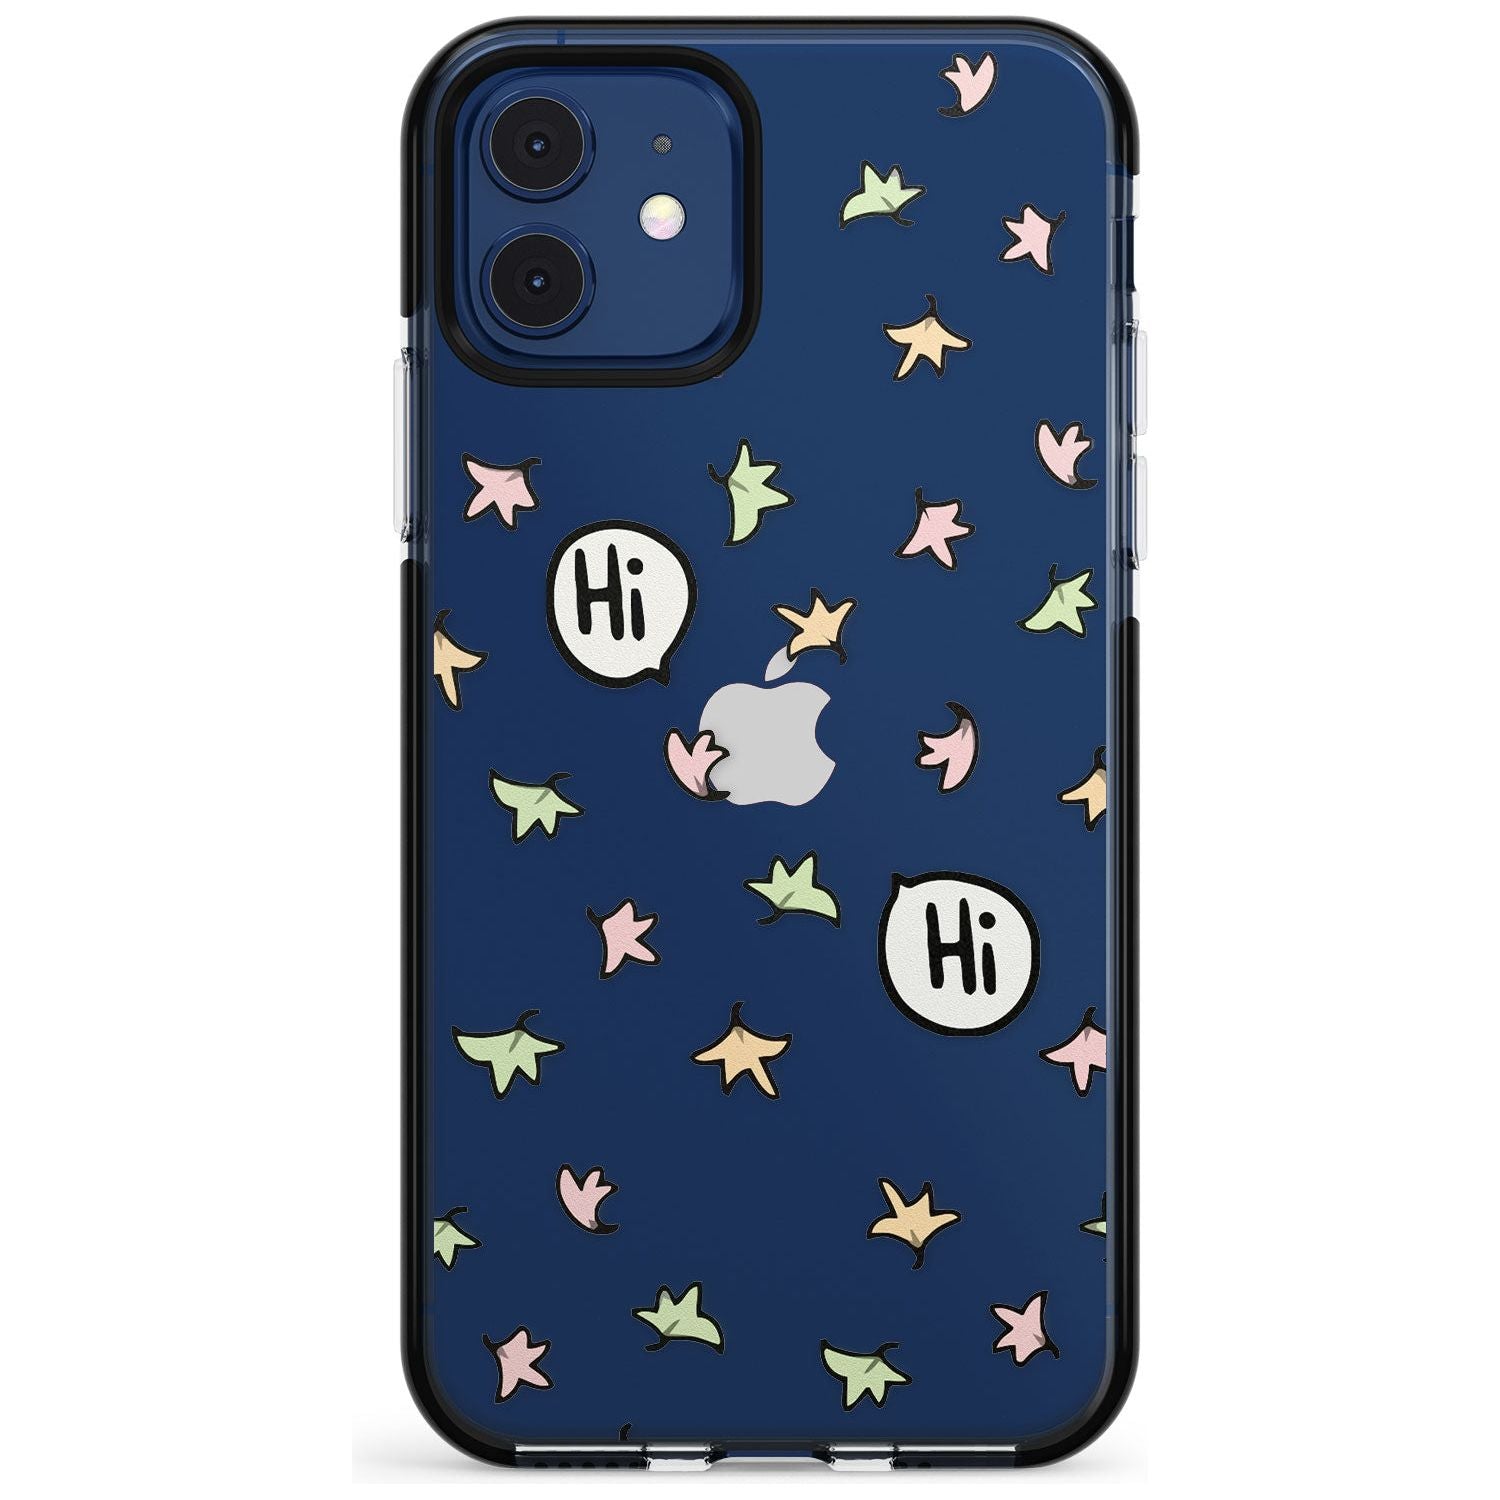 Heartstopper Leaves Pattern Black Impact Phone Case for iPhone 11 Pro Max